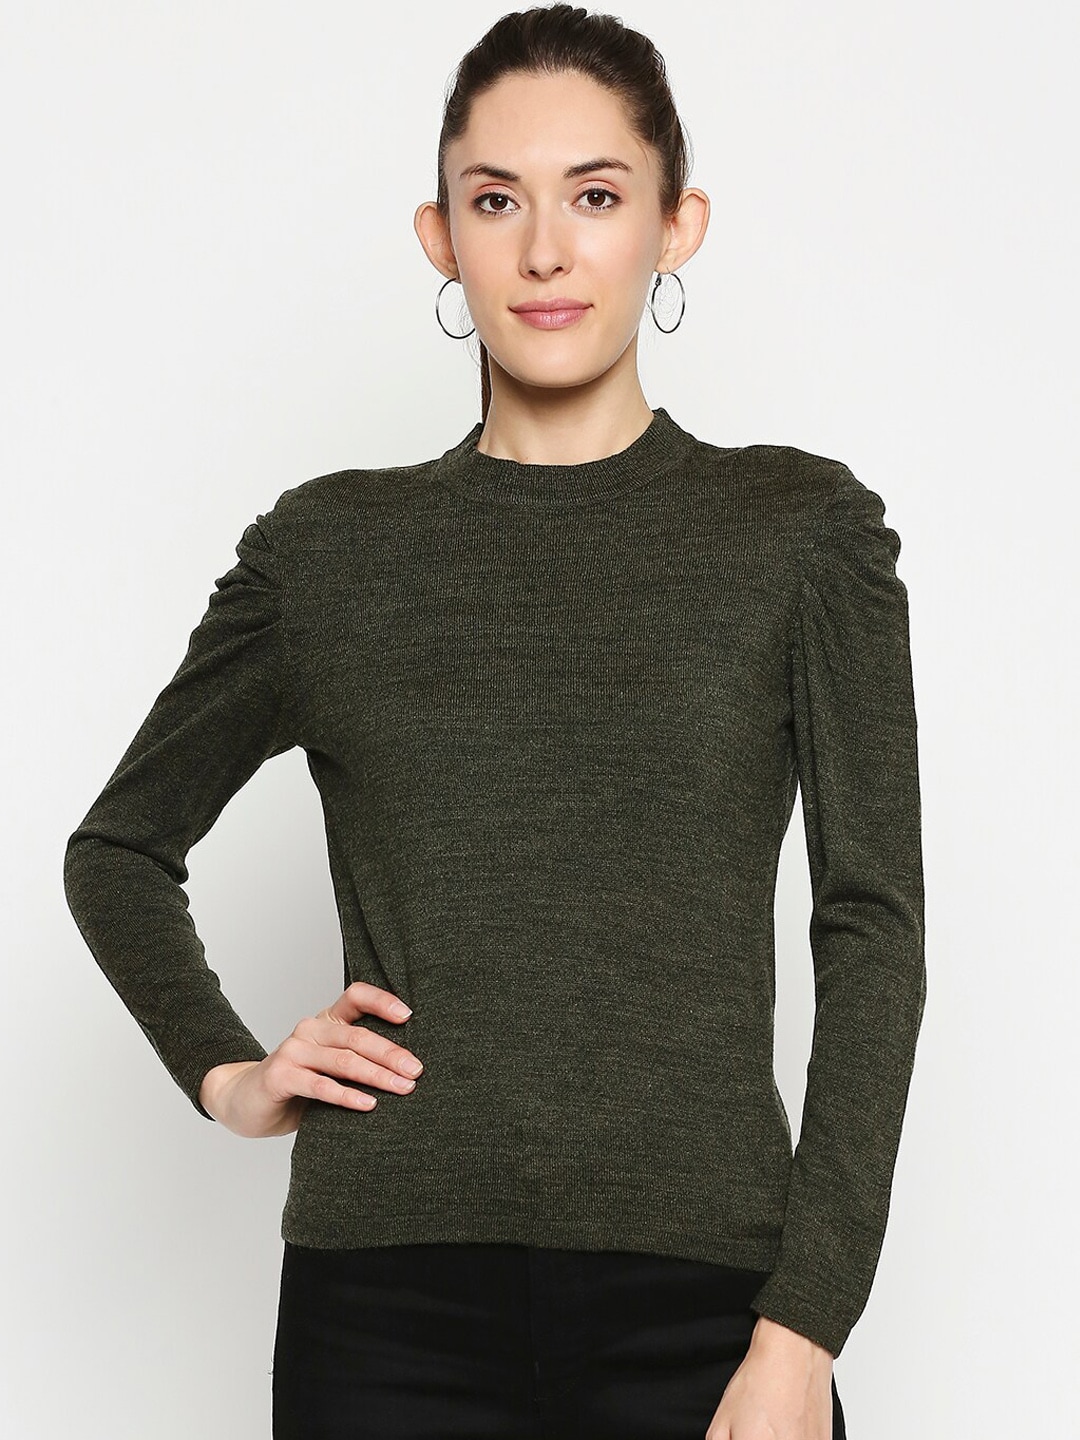 Annabelle by Pantaloons Women Olive Solid Pullover Sweater Price in India